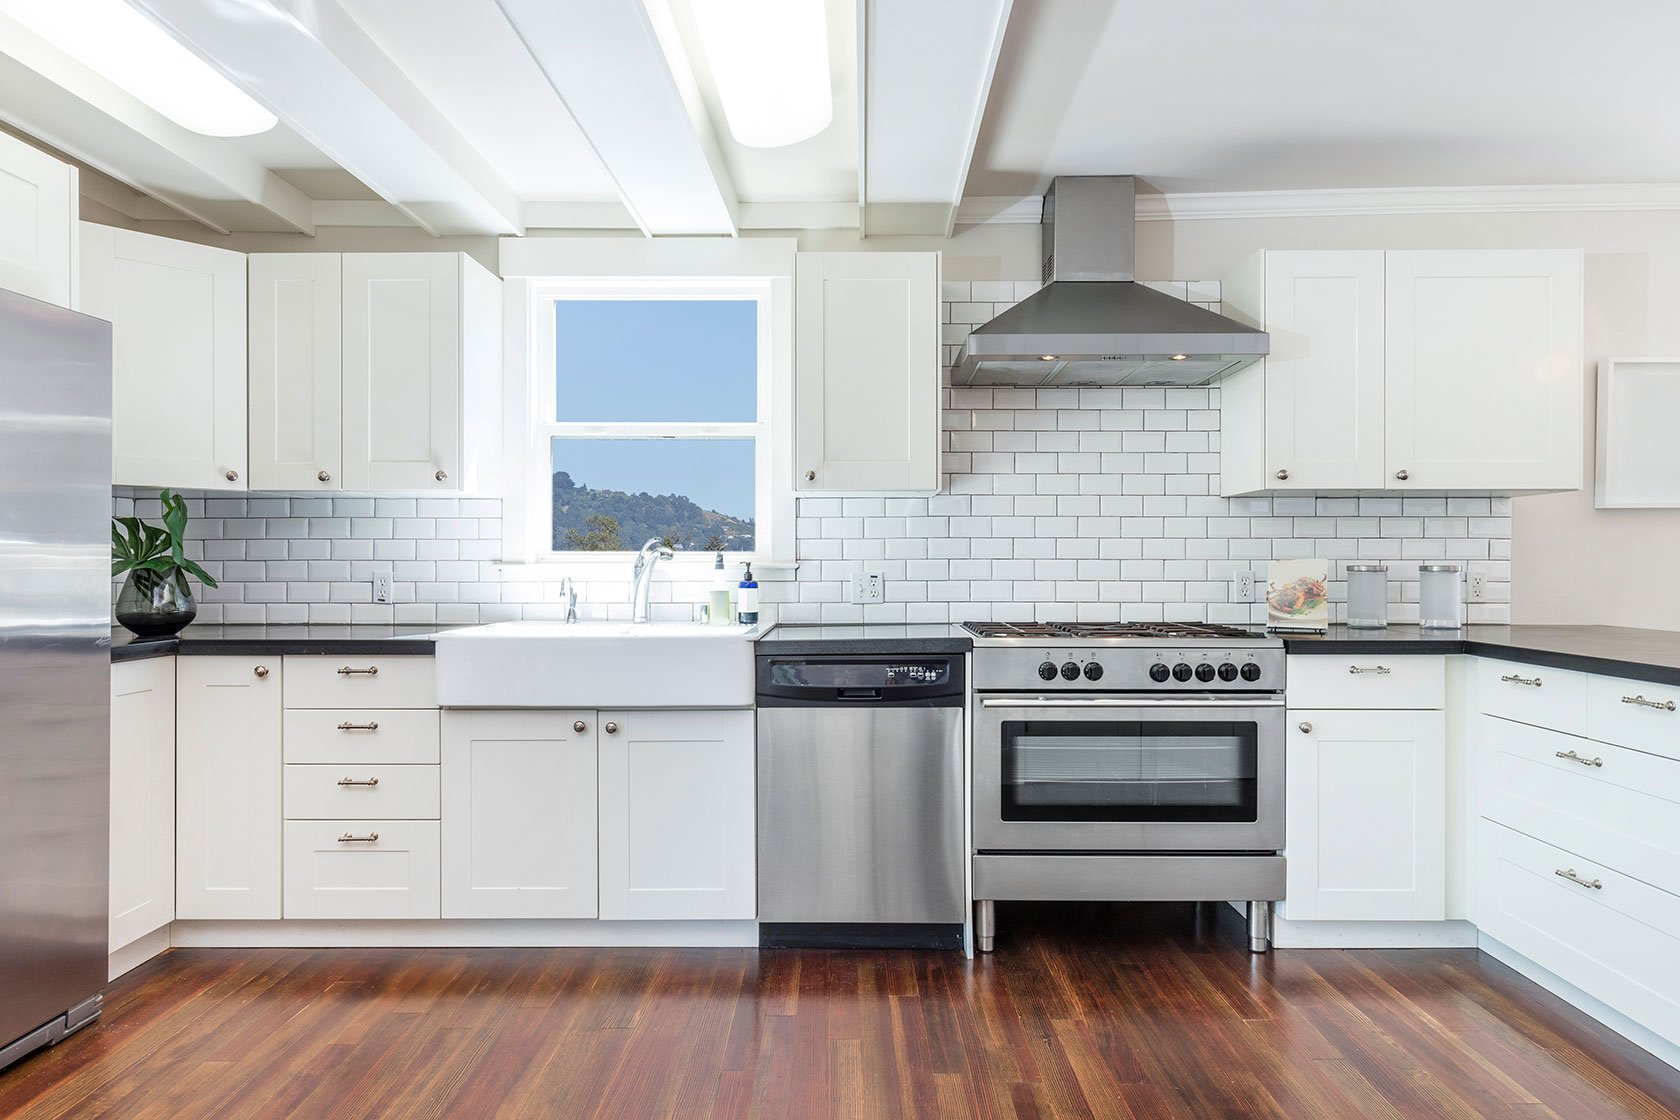 The benefits of having custom cabinets made